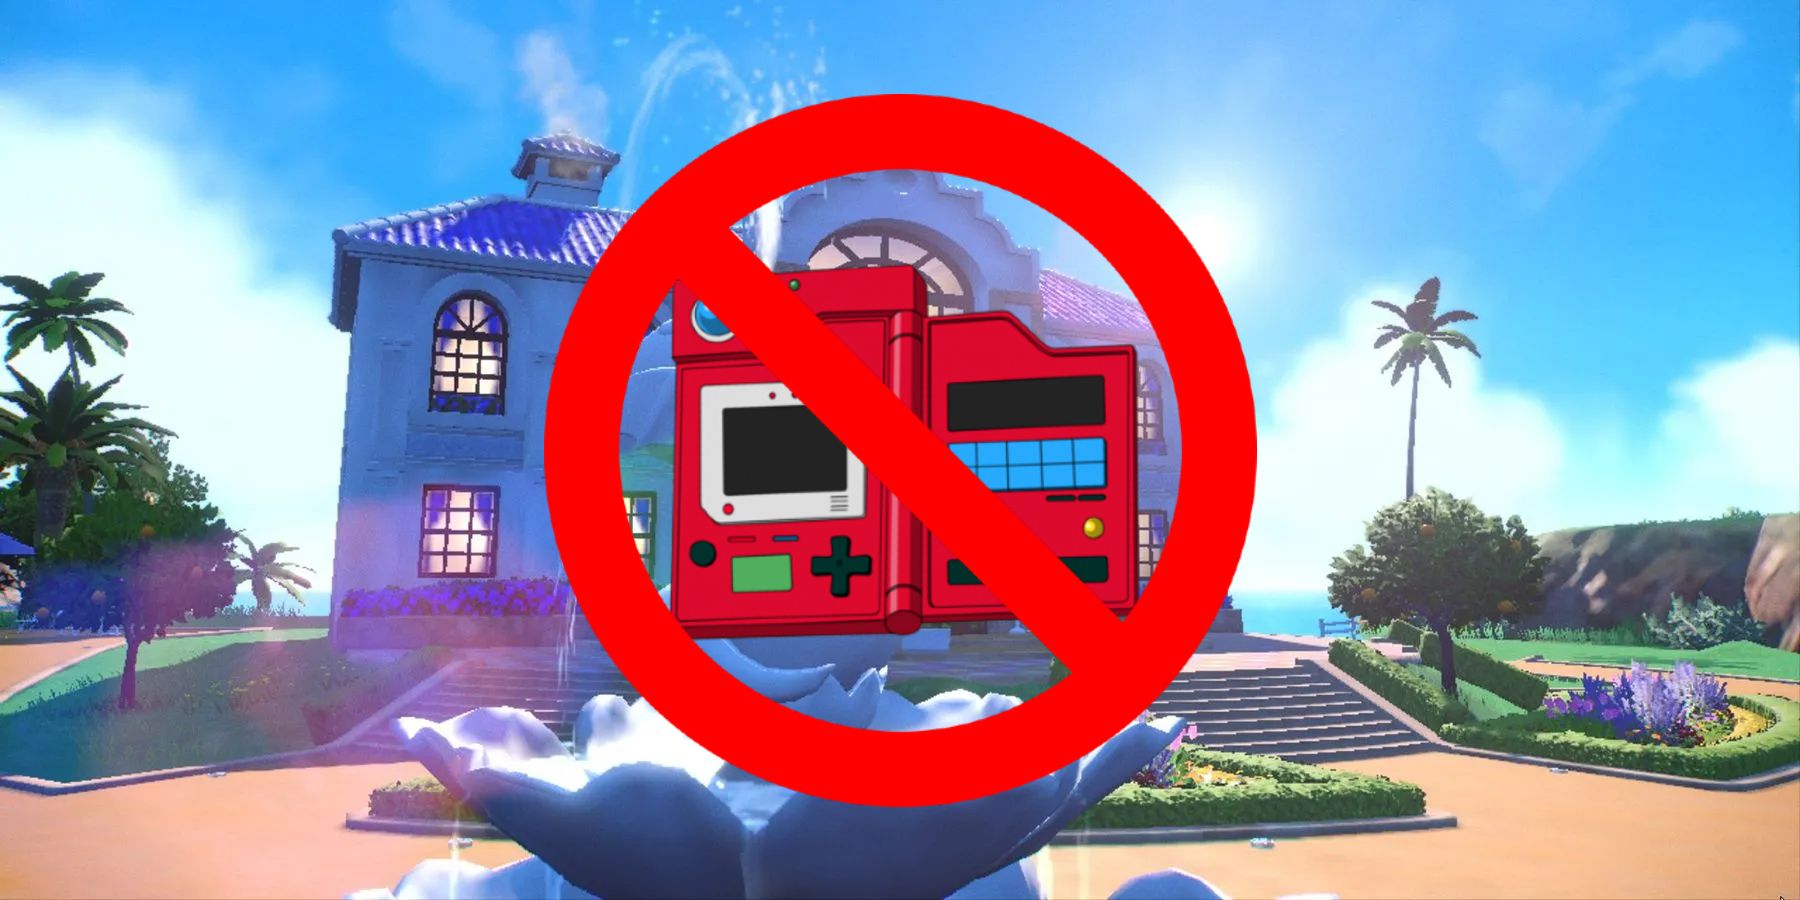 Pokedex within a forbidden sign, overlaid on Pokemon Scarlet and Violet's house